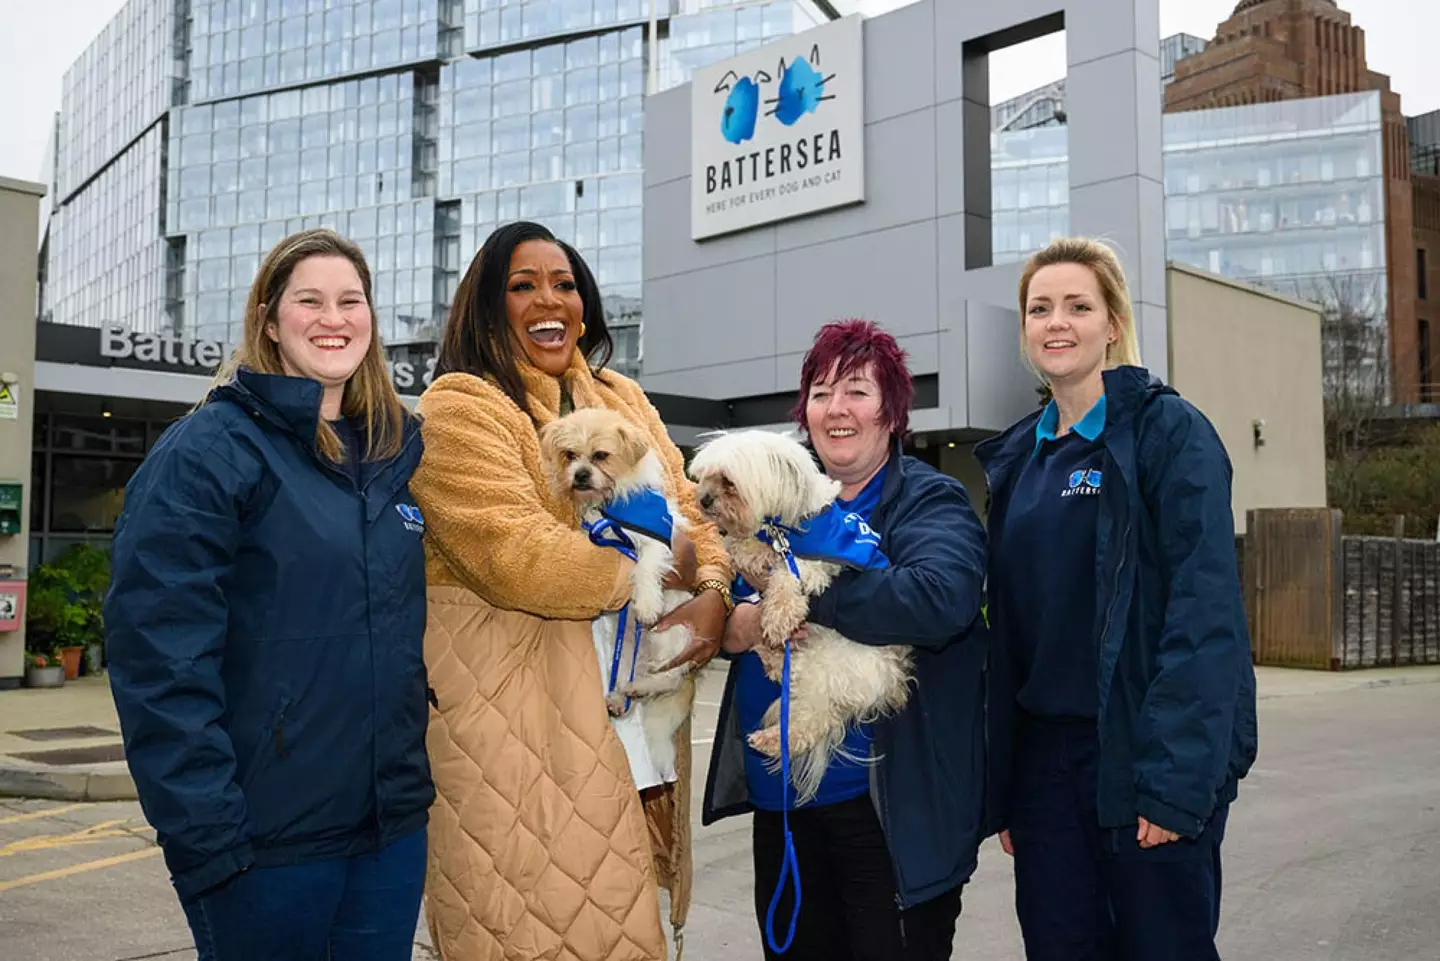 Alison Hammond was announced to be the new presenter of For The Love of Dogs.